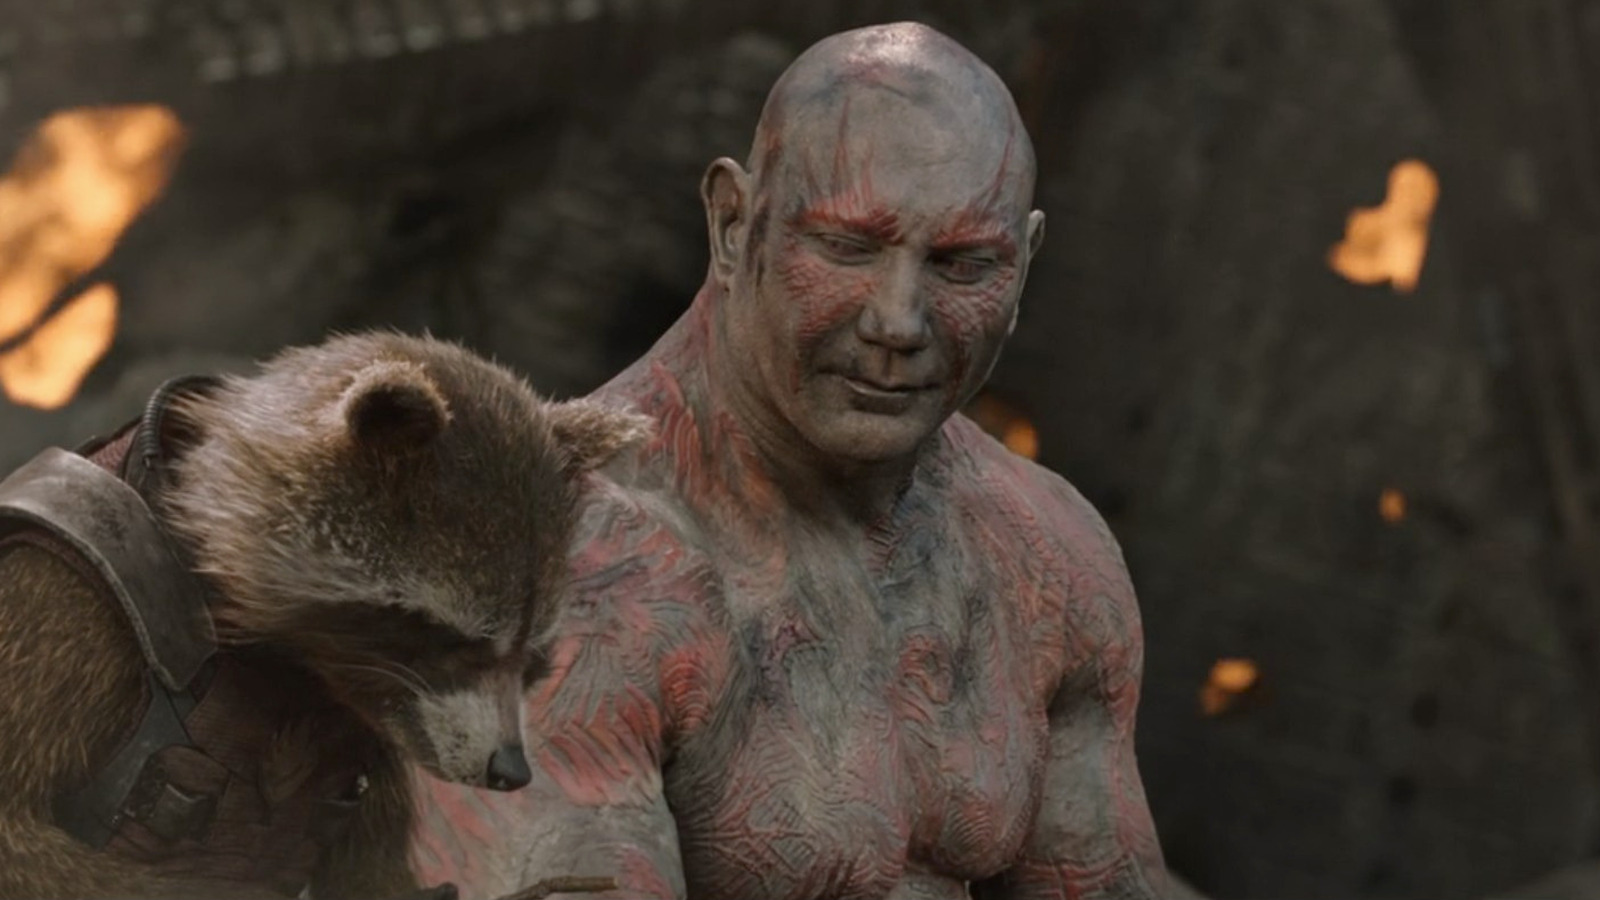 GUARDIANS OF THE GALAXY Lands Dave Bautista as Drax the Destroyer